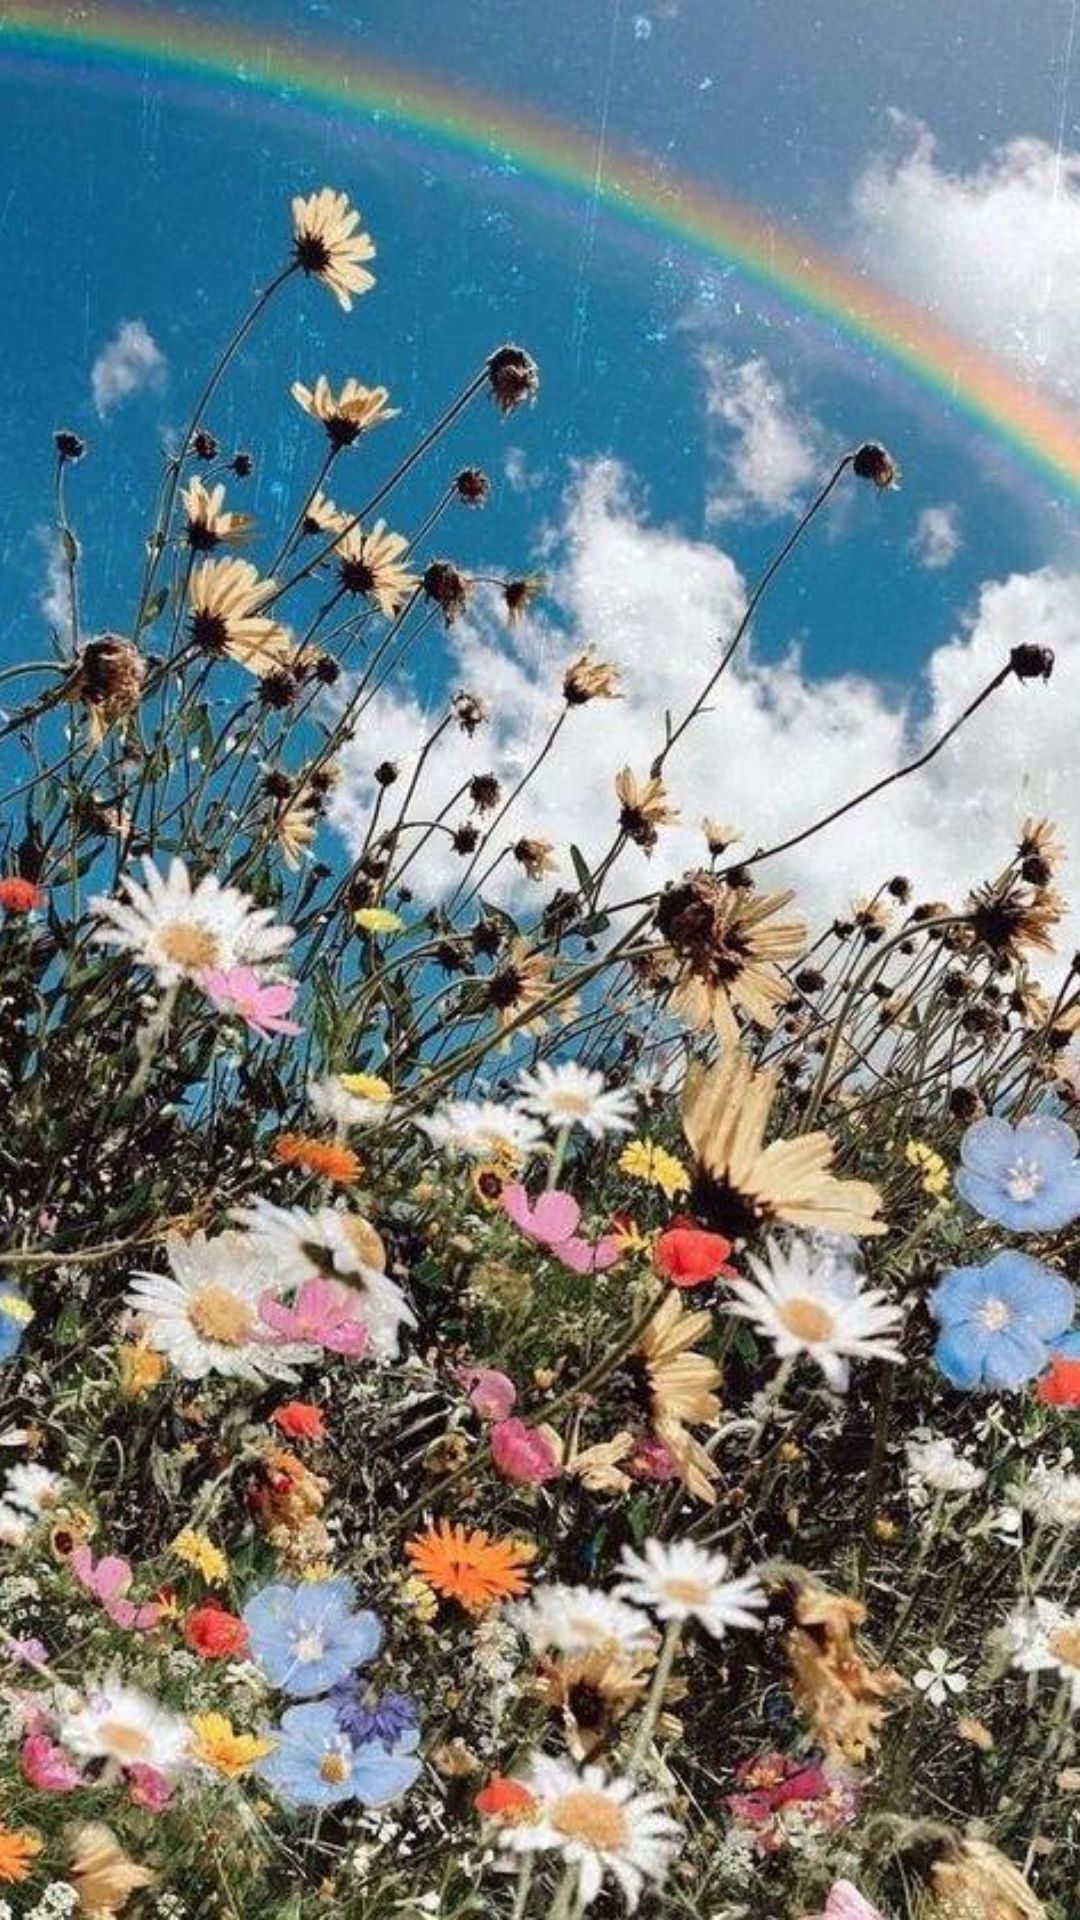 A rainbow in the sky above a field of flowers - Cottagecore